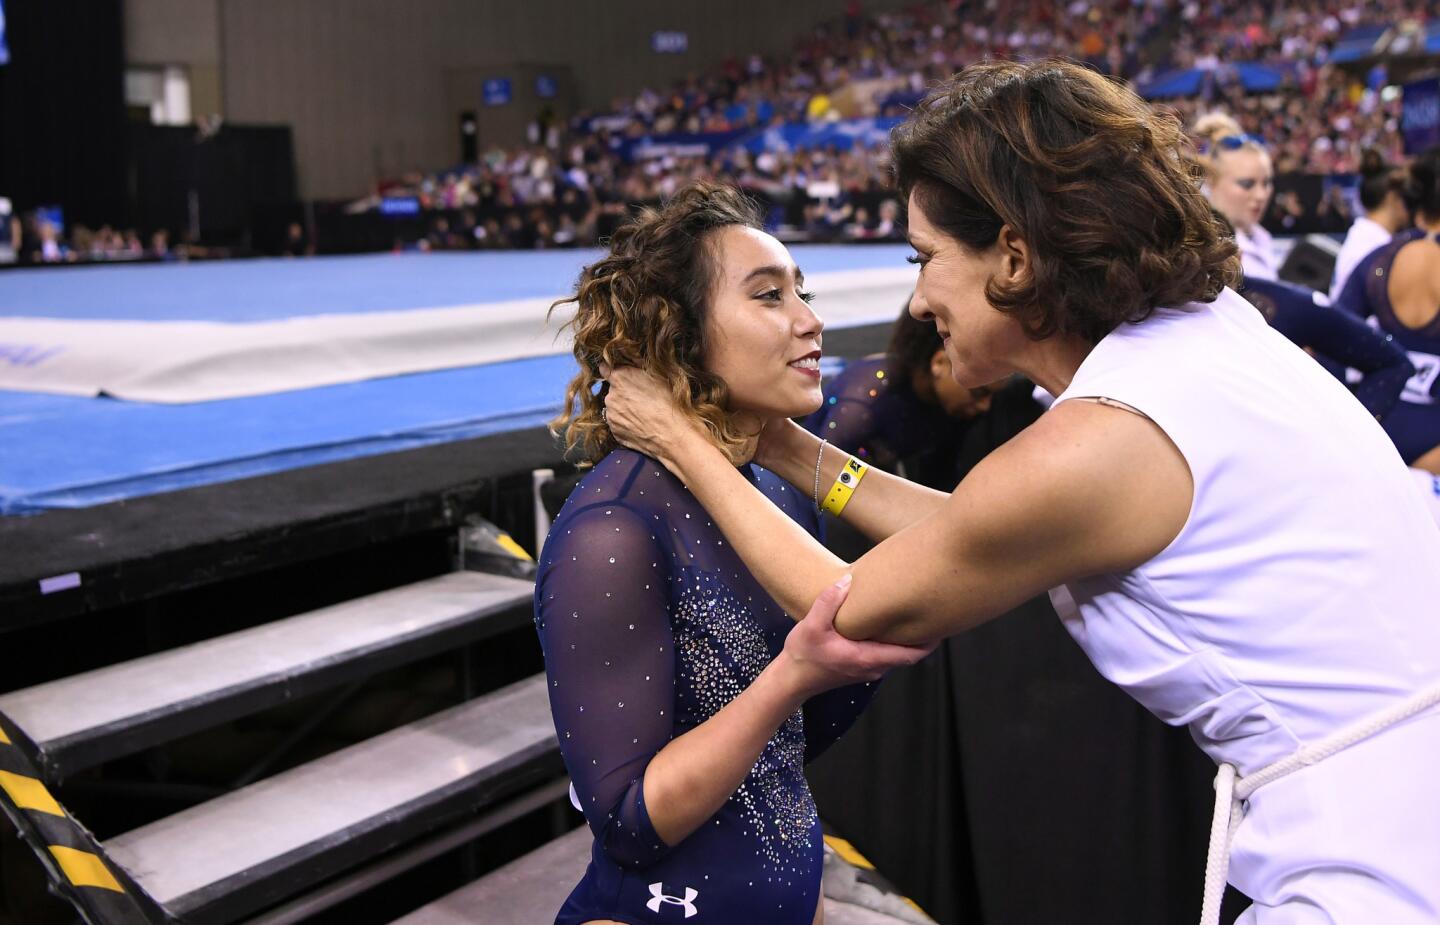 Katelyn Ohashi is held by Coach Valorie Kondros Field after Ohashi's last floor routine as a senior Saturday at the NCAA gymnastics championship in Fort Worth, Texas.